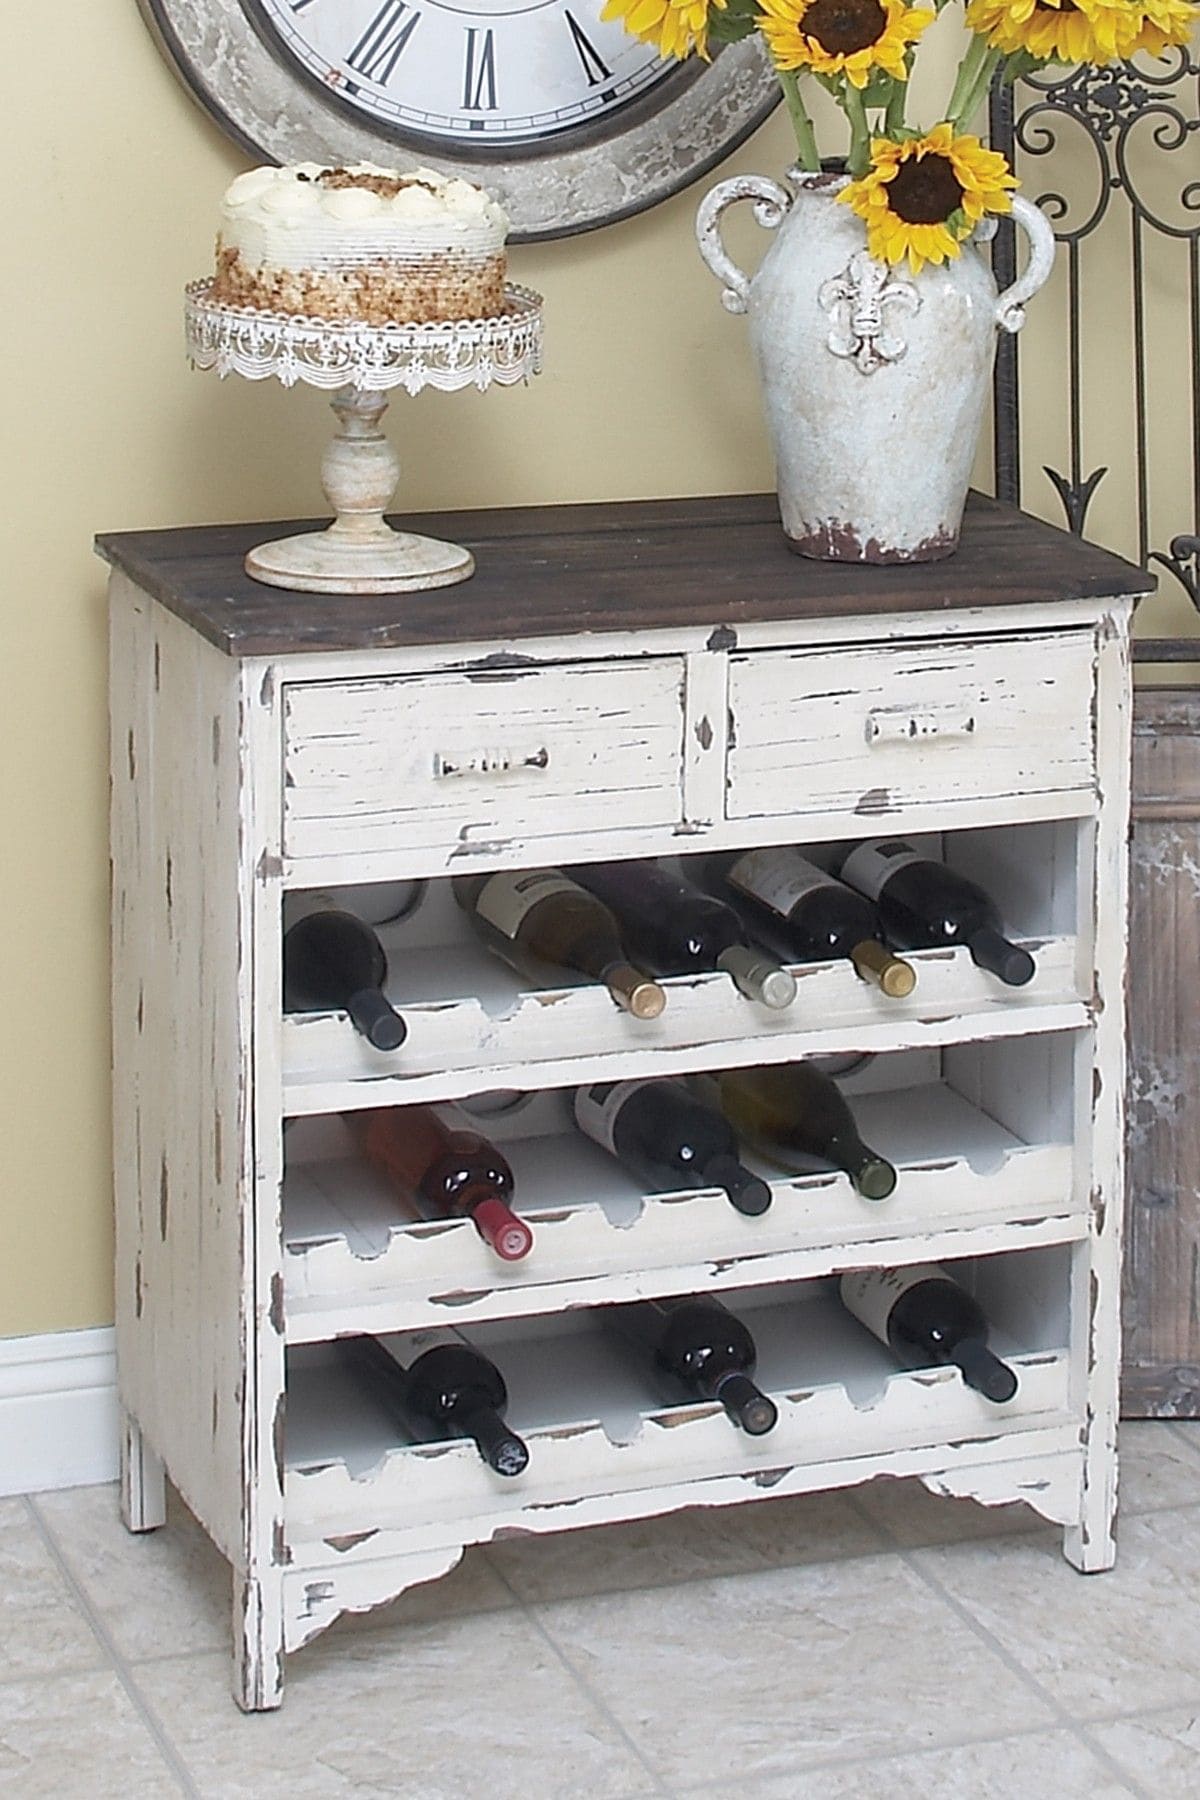 25 great ideas to repurpose old dressers - 91